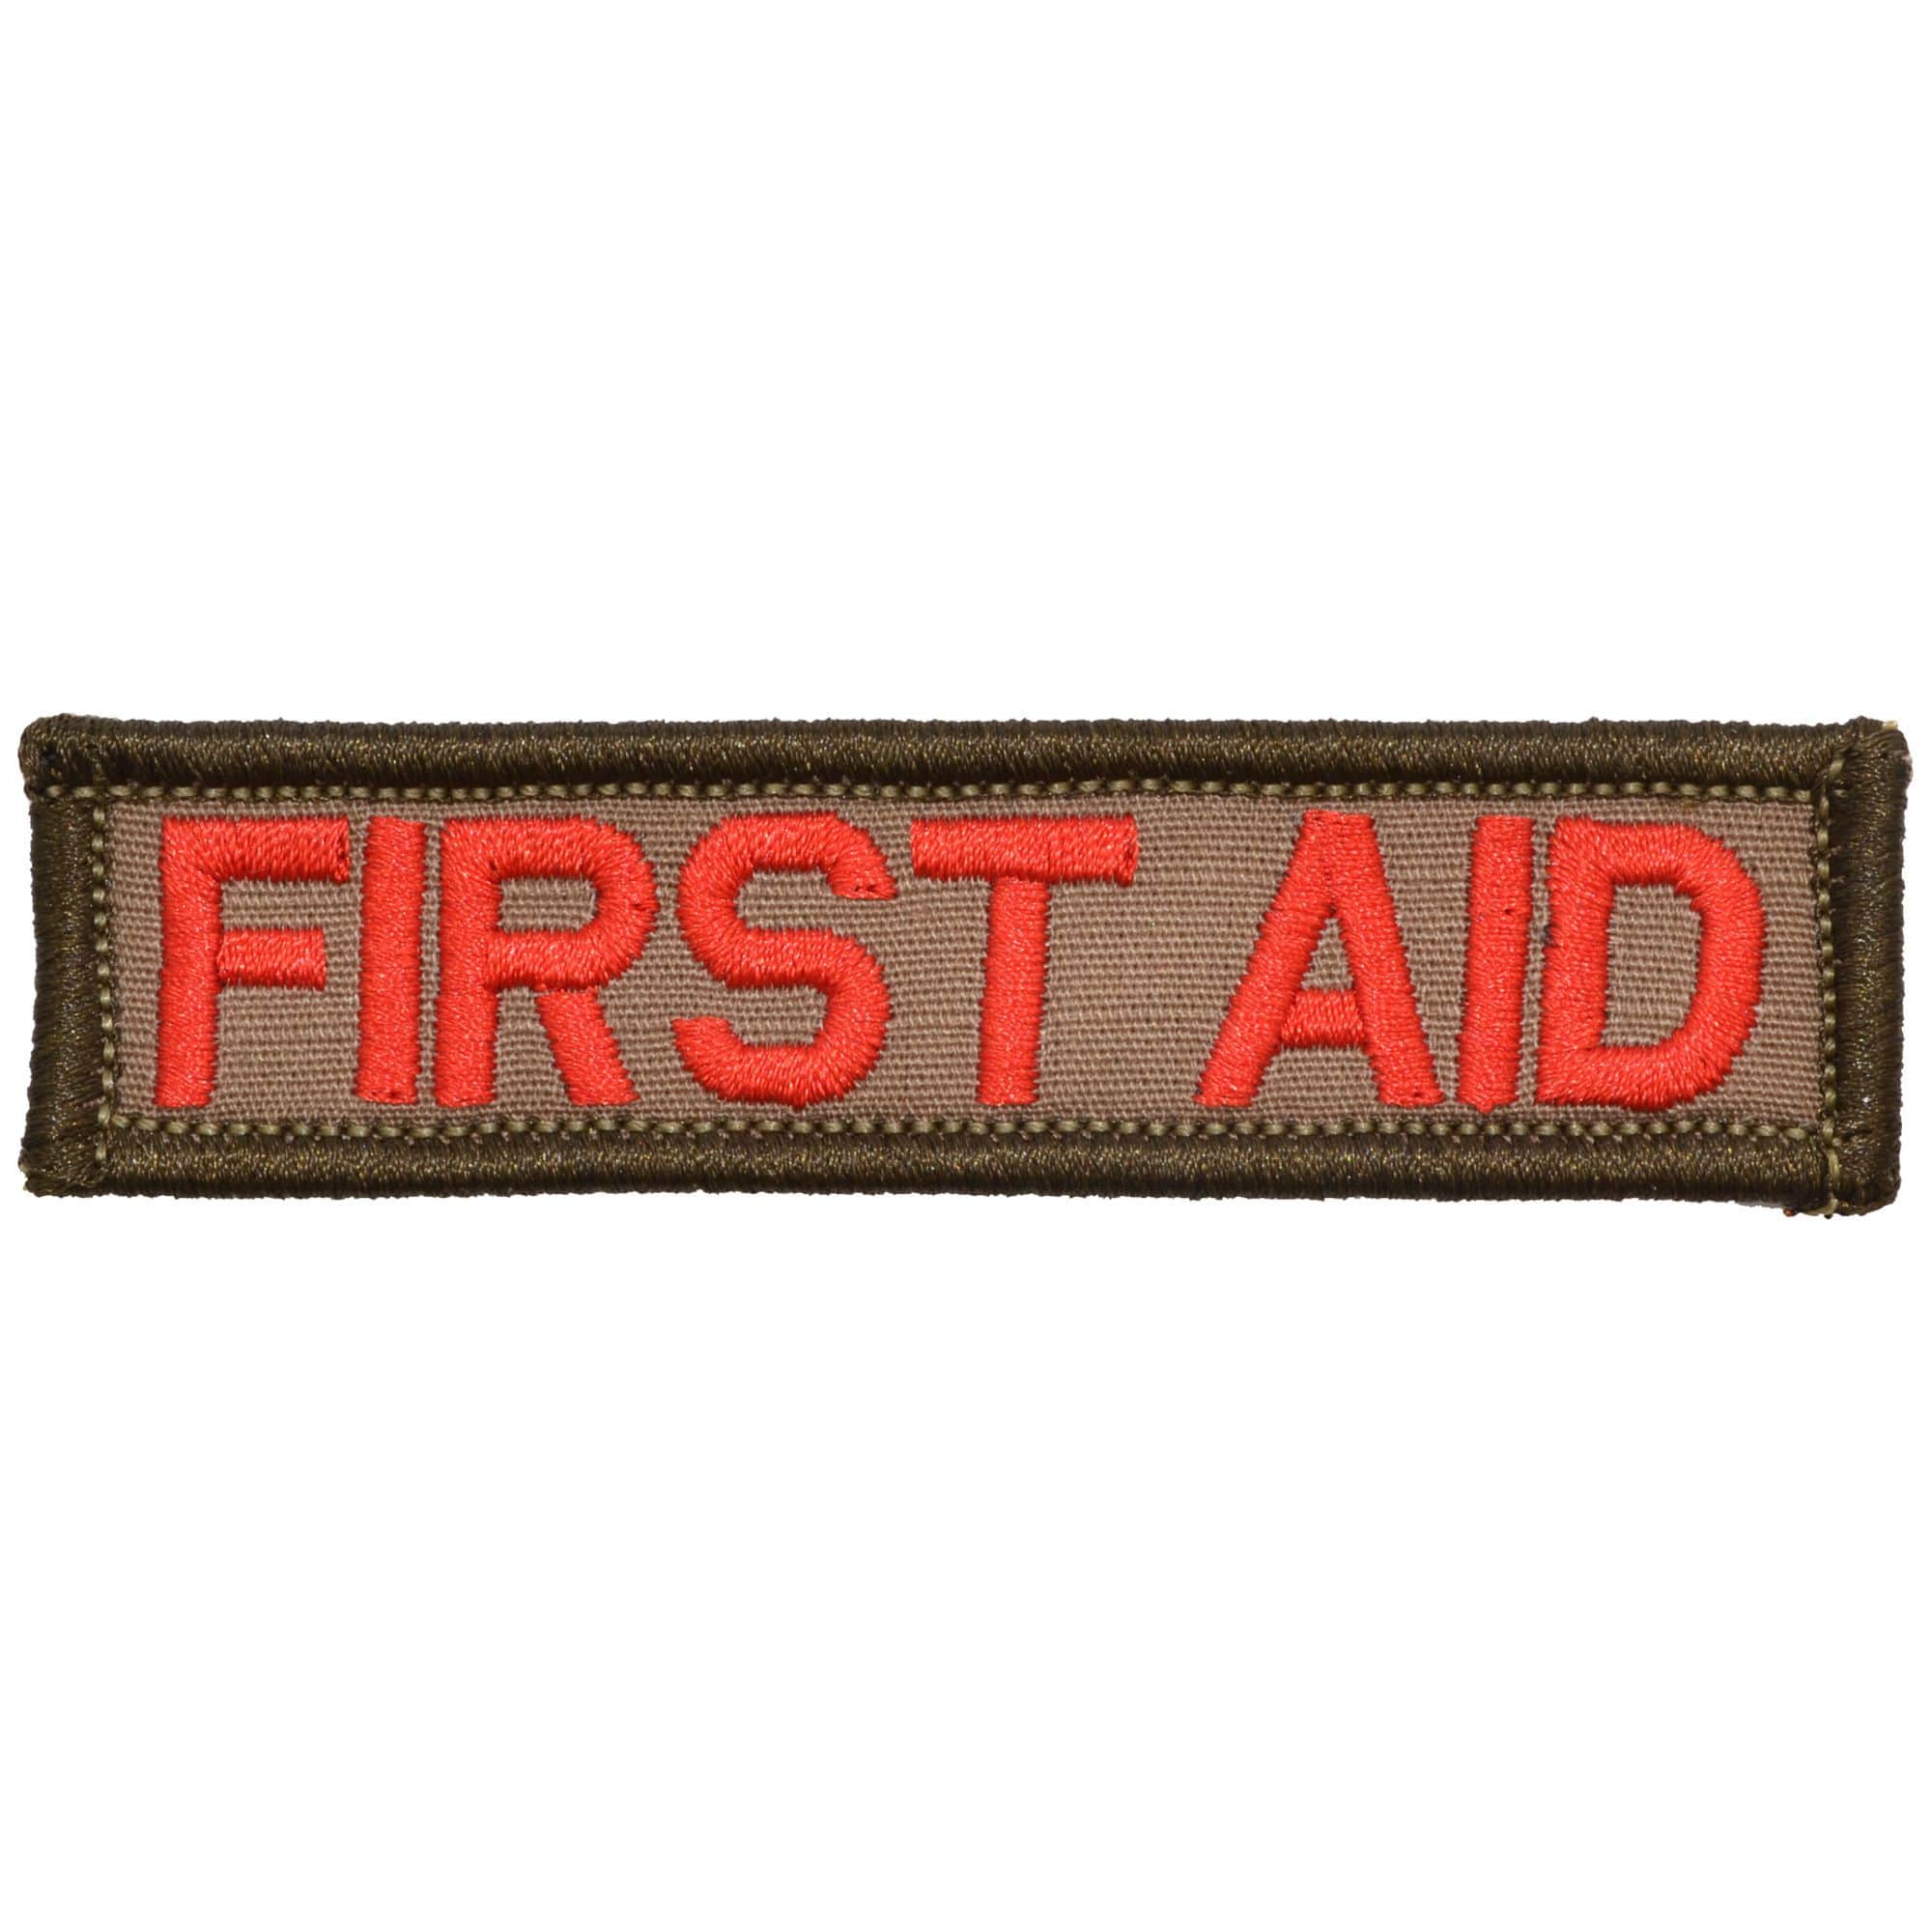 First Aid - 1x3.75 Patch